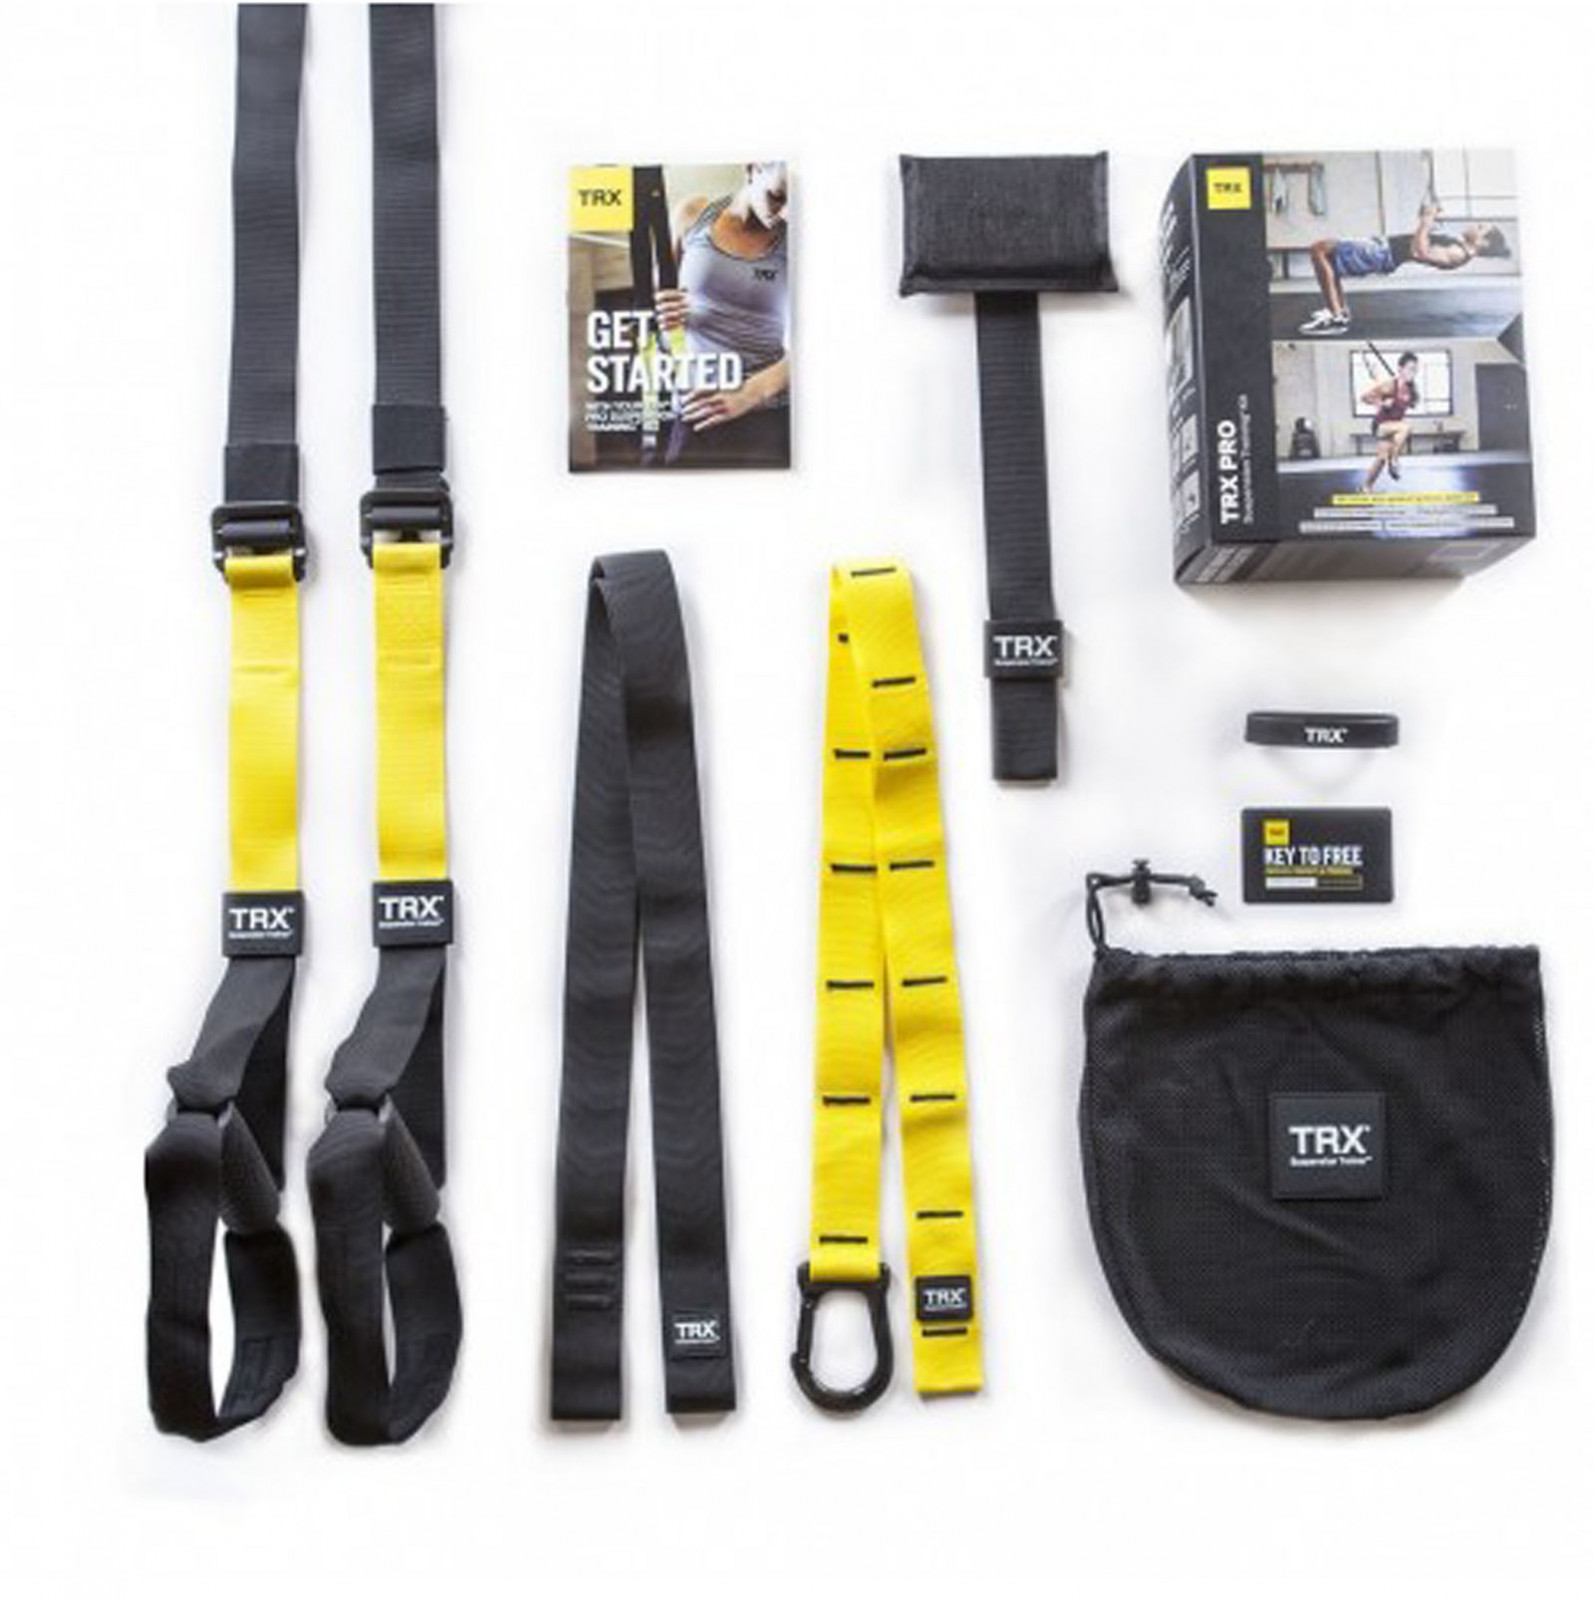 TRX HENCHGRIPZ Pro Suspension Trainer Bodyweight Strap Kit & Free Ceiling Anchors 